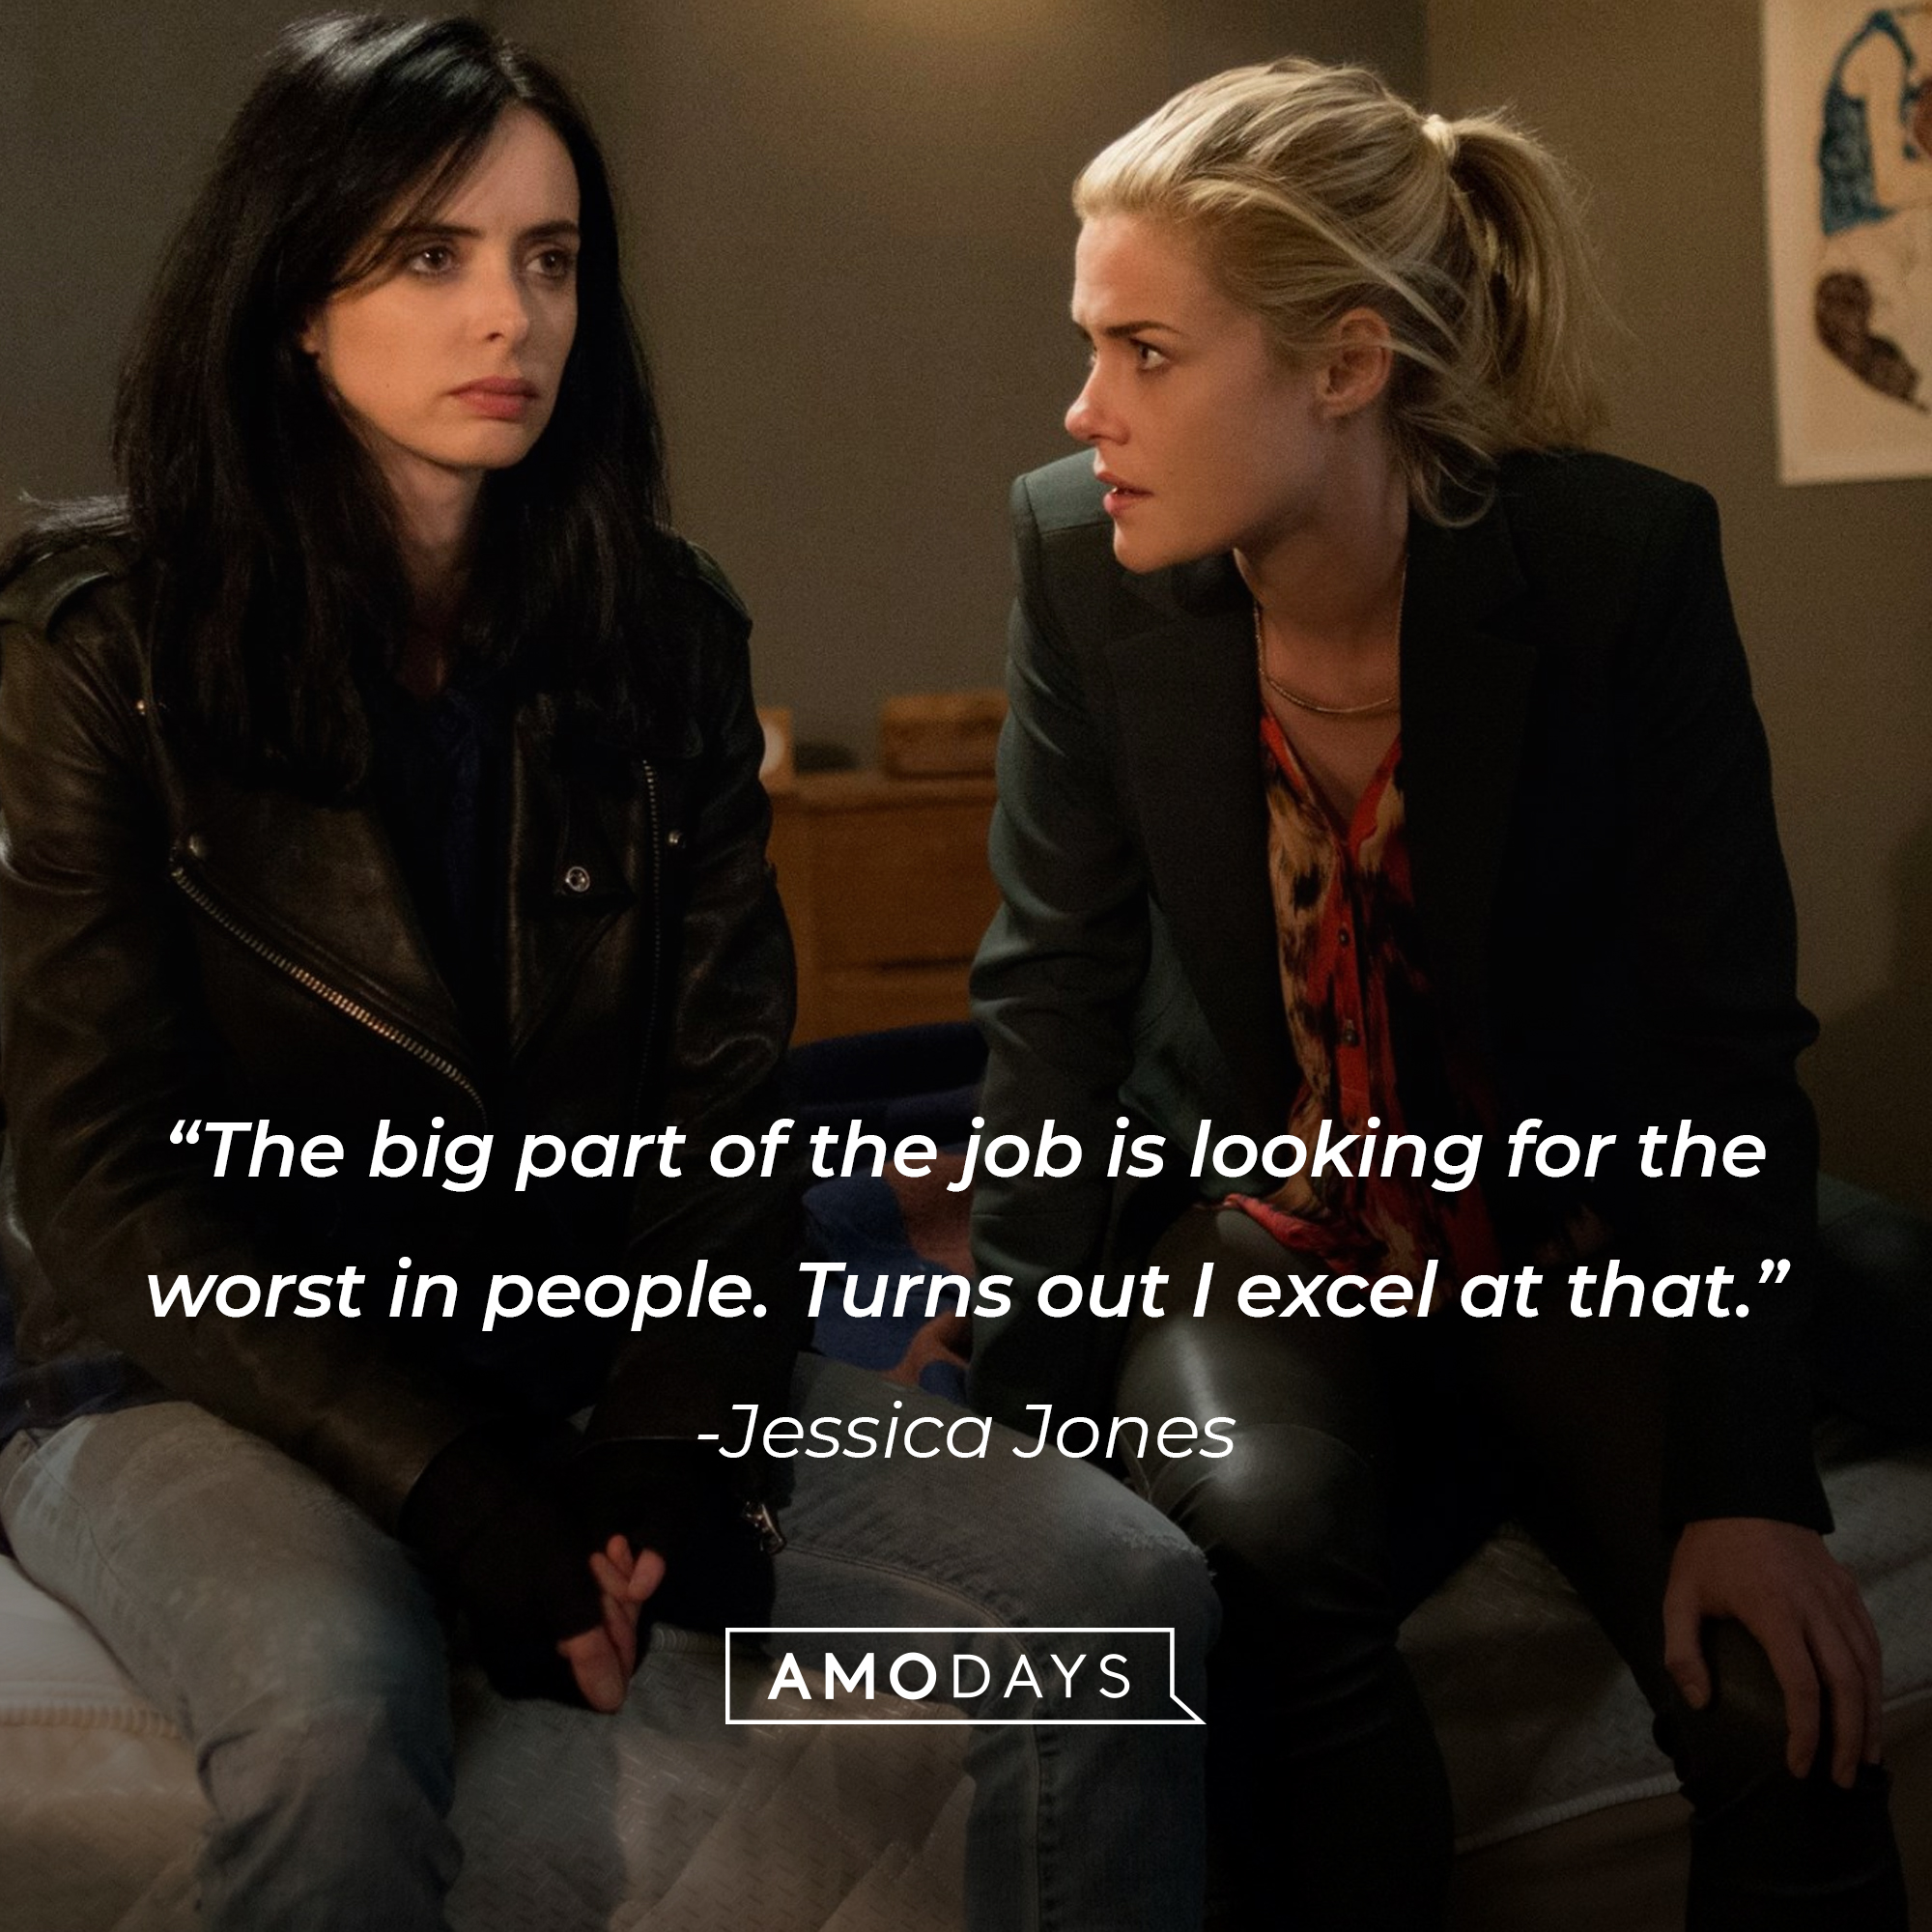 An image of Jessica Jones and Patricia "Trish" Walker with Jones’  quote: “The big part of the job is looking for the worst in people. Turns out I excel at that."┃Source:facebook.com/JessicaJonesLat